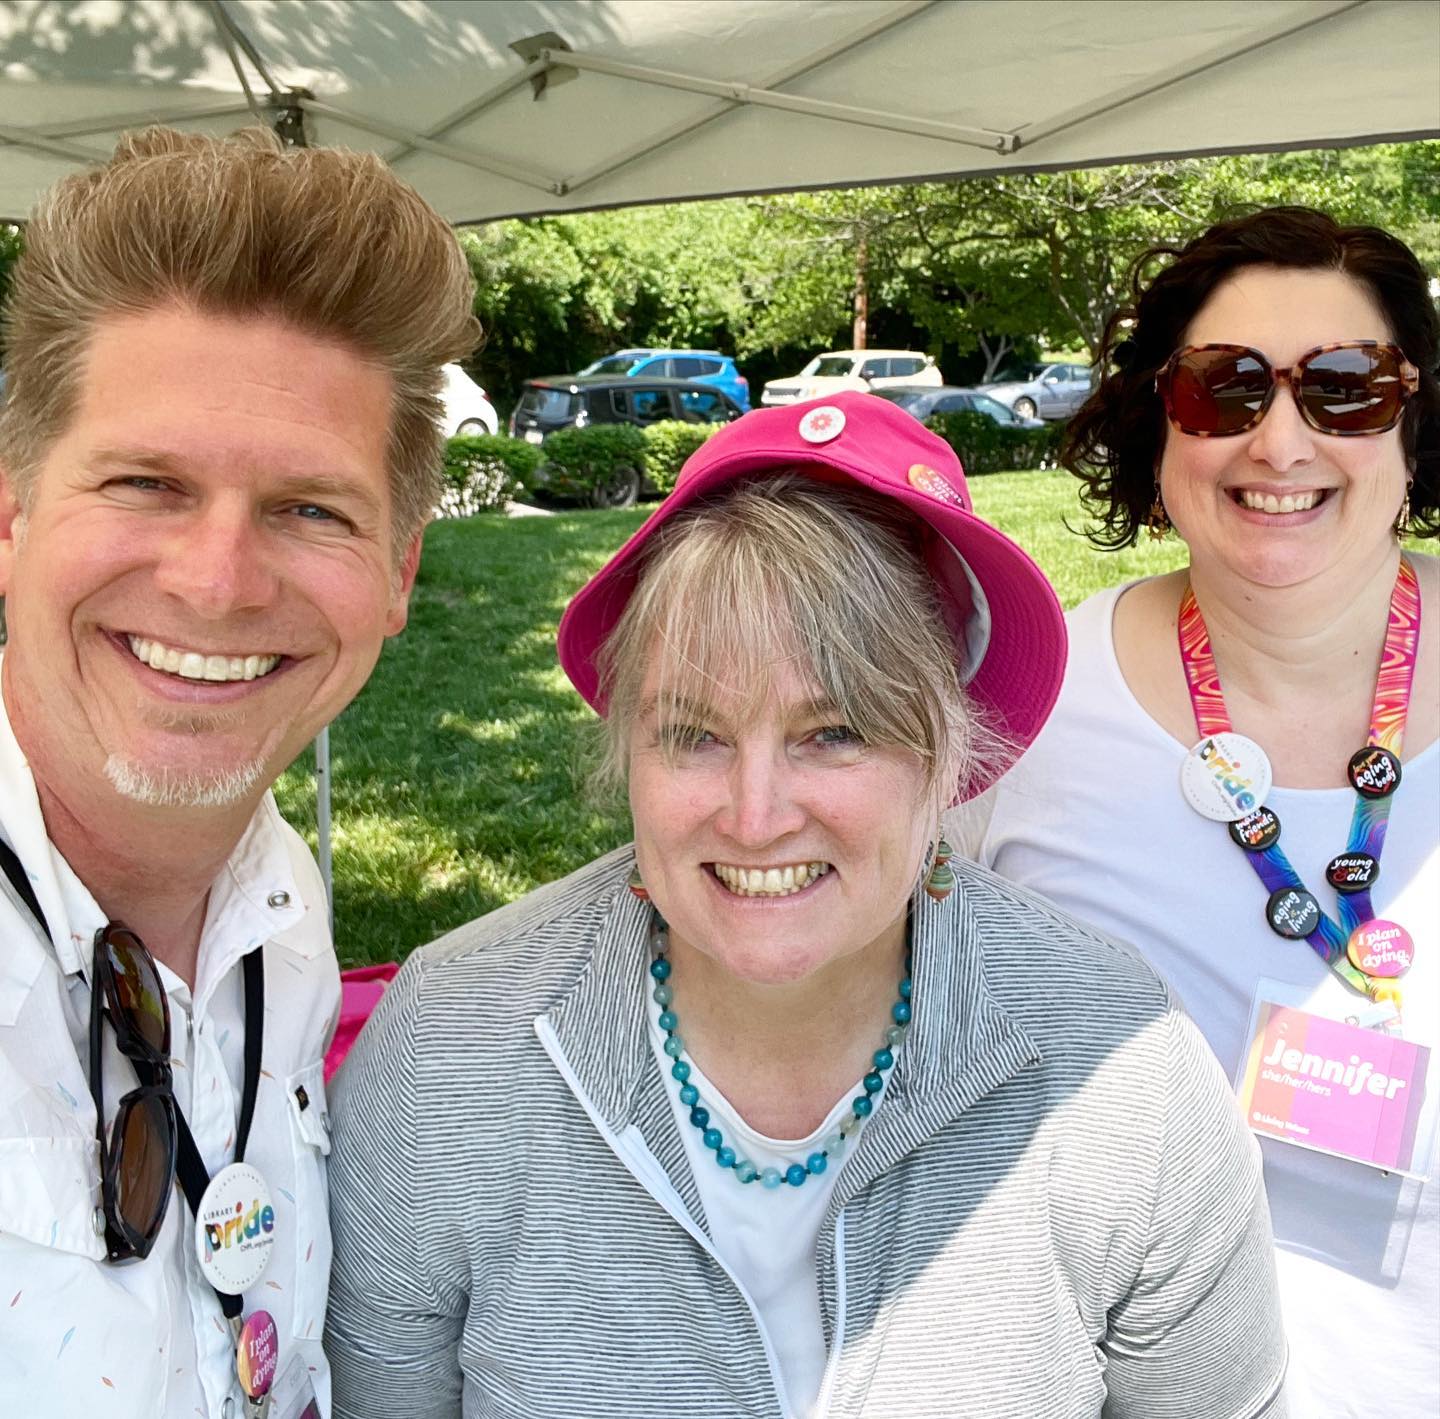 We plan on dying (and living well)! Our Living Values team met inspiring folx at the @cincylibrary Lemonade on the  Lawn Health and Well-being Fair. ️ celebrating this amazing community and co-creating well-being!